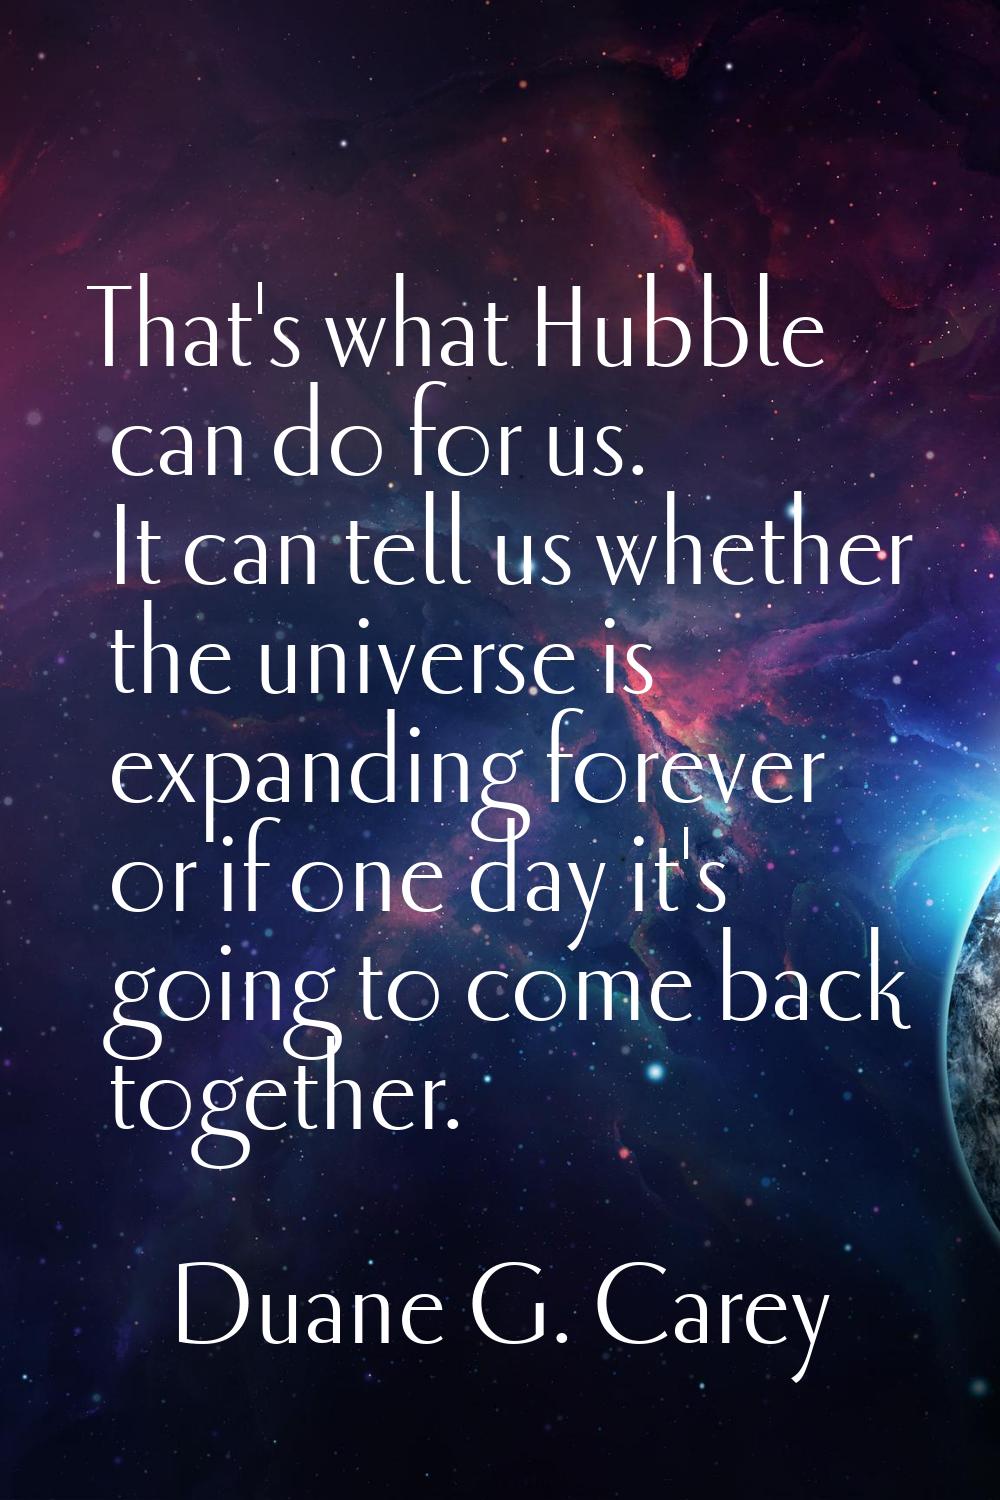 That's what Hubble can do for us. It can tell us whether the universe is expanding forever or if on